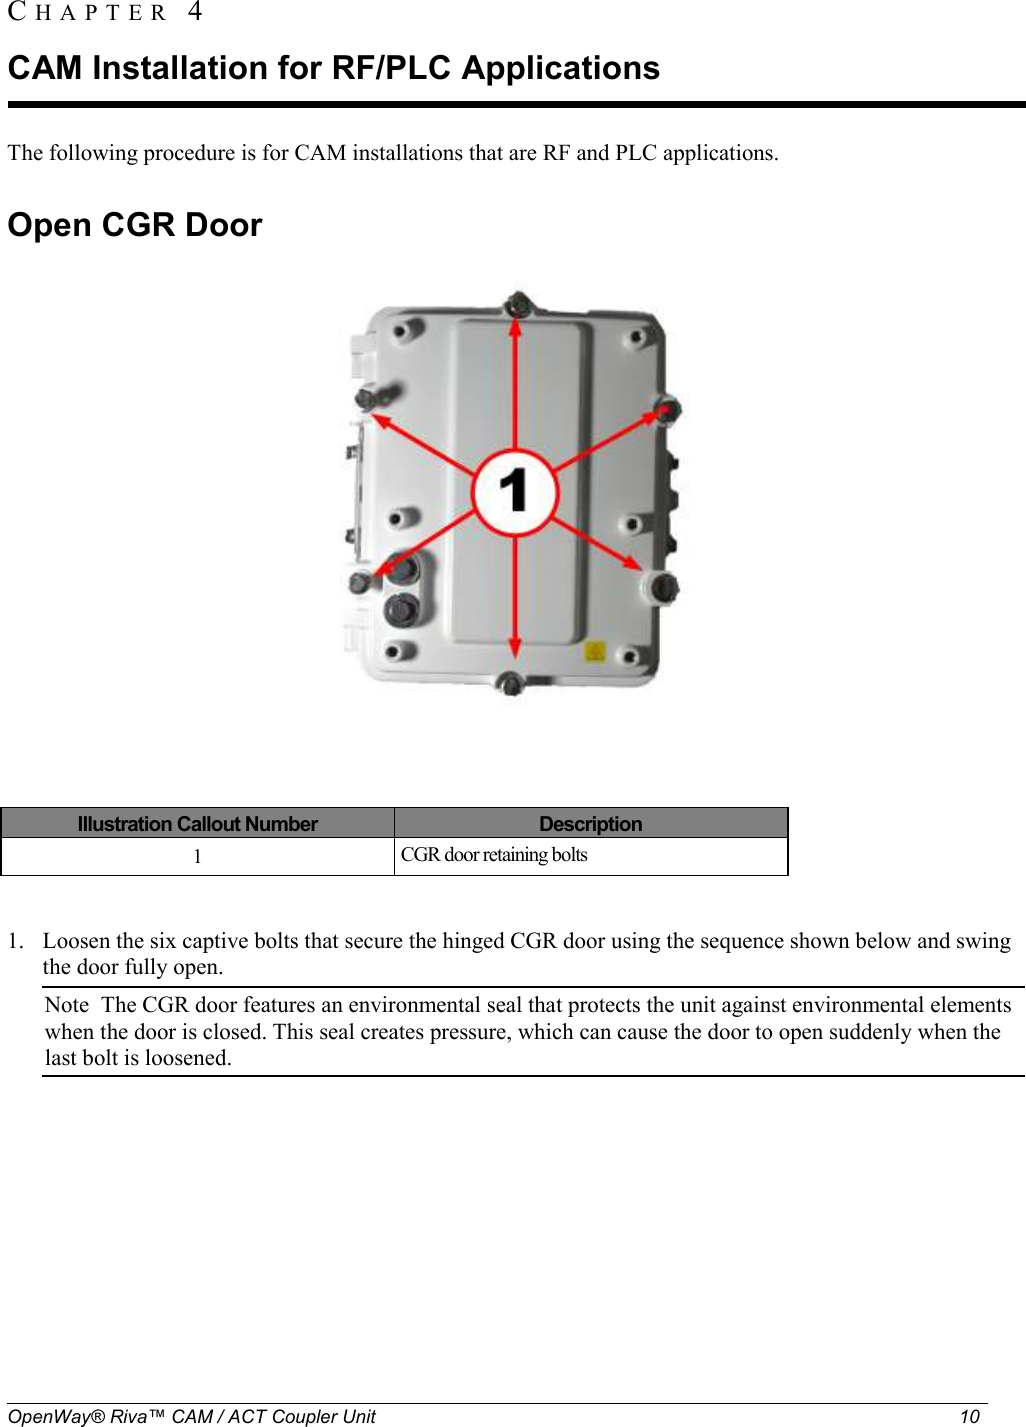  OpenWay® Riva™ CAM / ACT Coupler Unit   10     The following procedure is for CAM installations that are RF and PLC applications.  Open CGR Door  Illustration Callout Number  Description 1  CGR door retaining bolts  1. Loosen the six captive bolts that secure the hinged CGR door using the sequence shown below and swing the door fully open. Note  The CGR door features an environmental seal that protects the unit against environmental elements when the door is closed. This seal creates pressure, which can cause the door to open suddenly when the last bolt is loosened. CH A P T E R  4  CAM Installation for RF/PLC Applications 